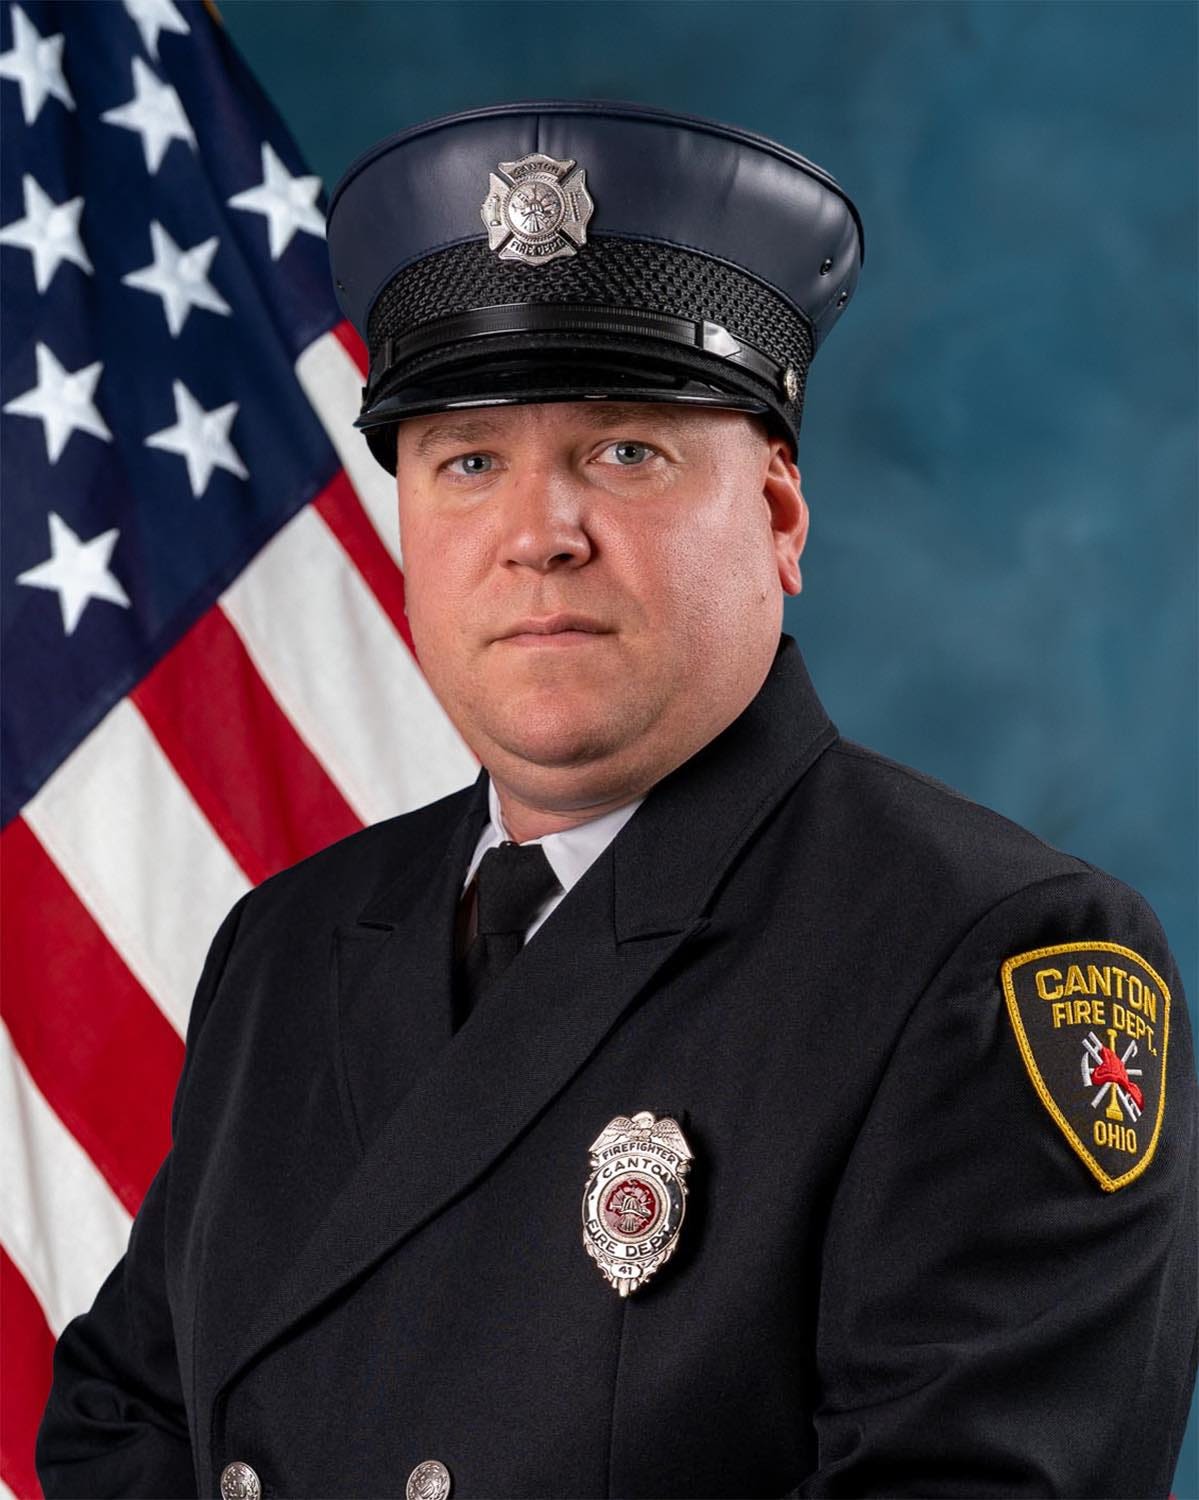 Last alarm service, calling hours scheduled for Canton firefighter Jared Kneale